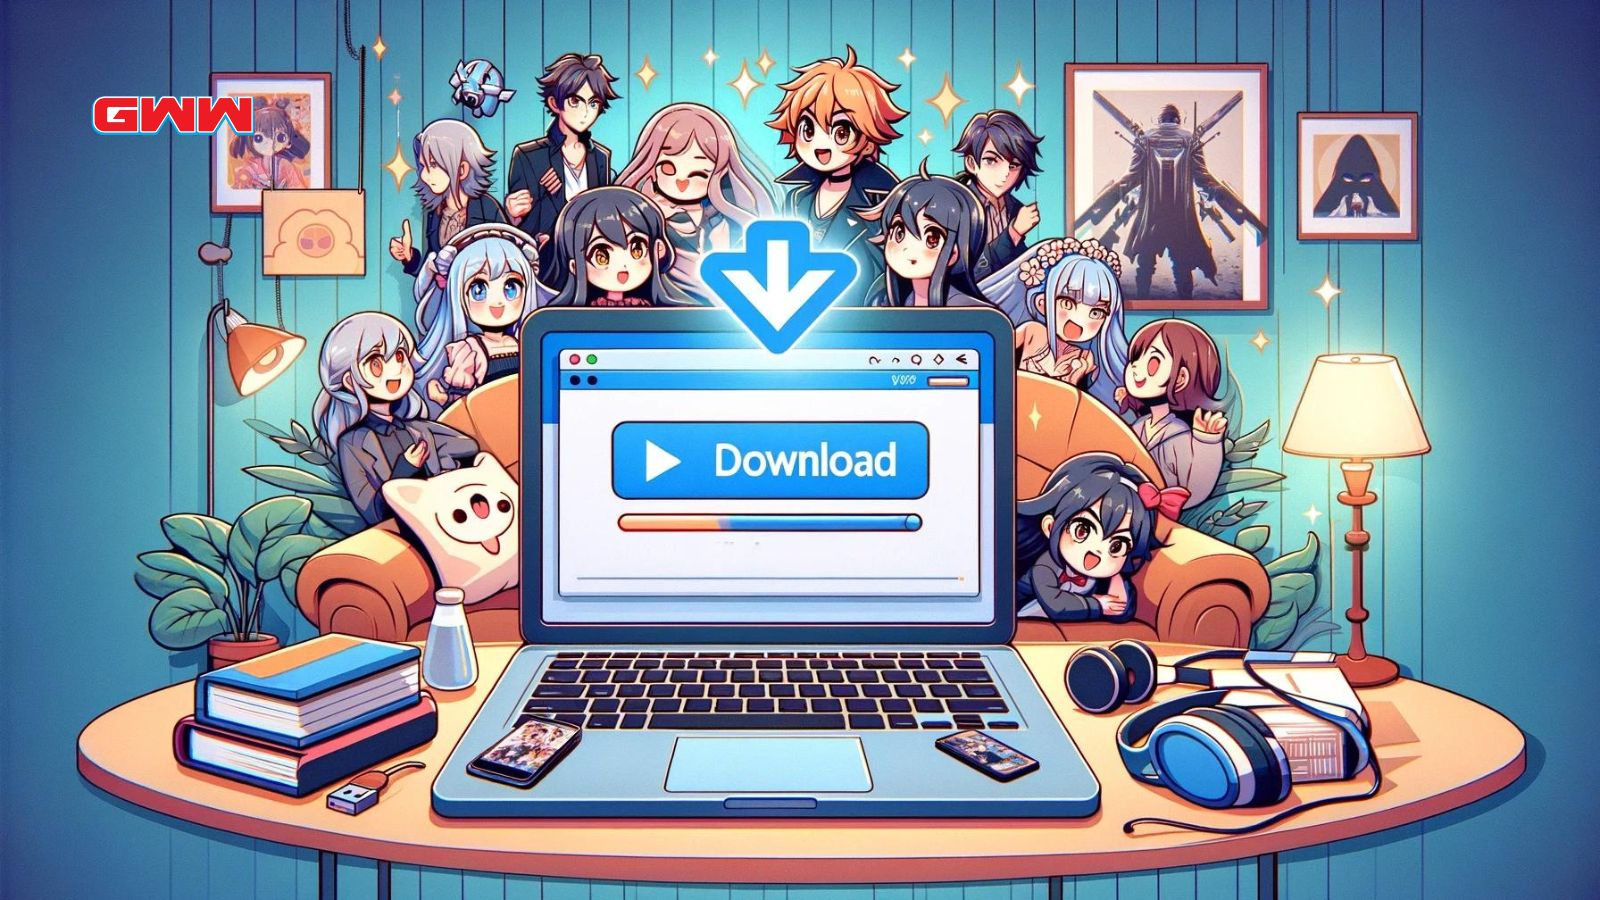 A lively and engaging widescreen image illustrating the process of downloading anime episodes for offline viewing.